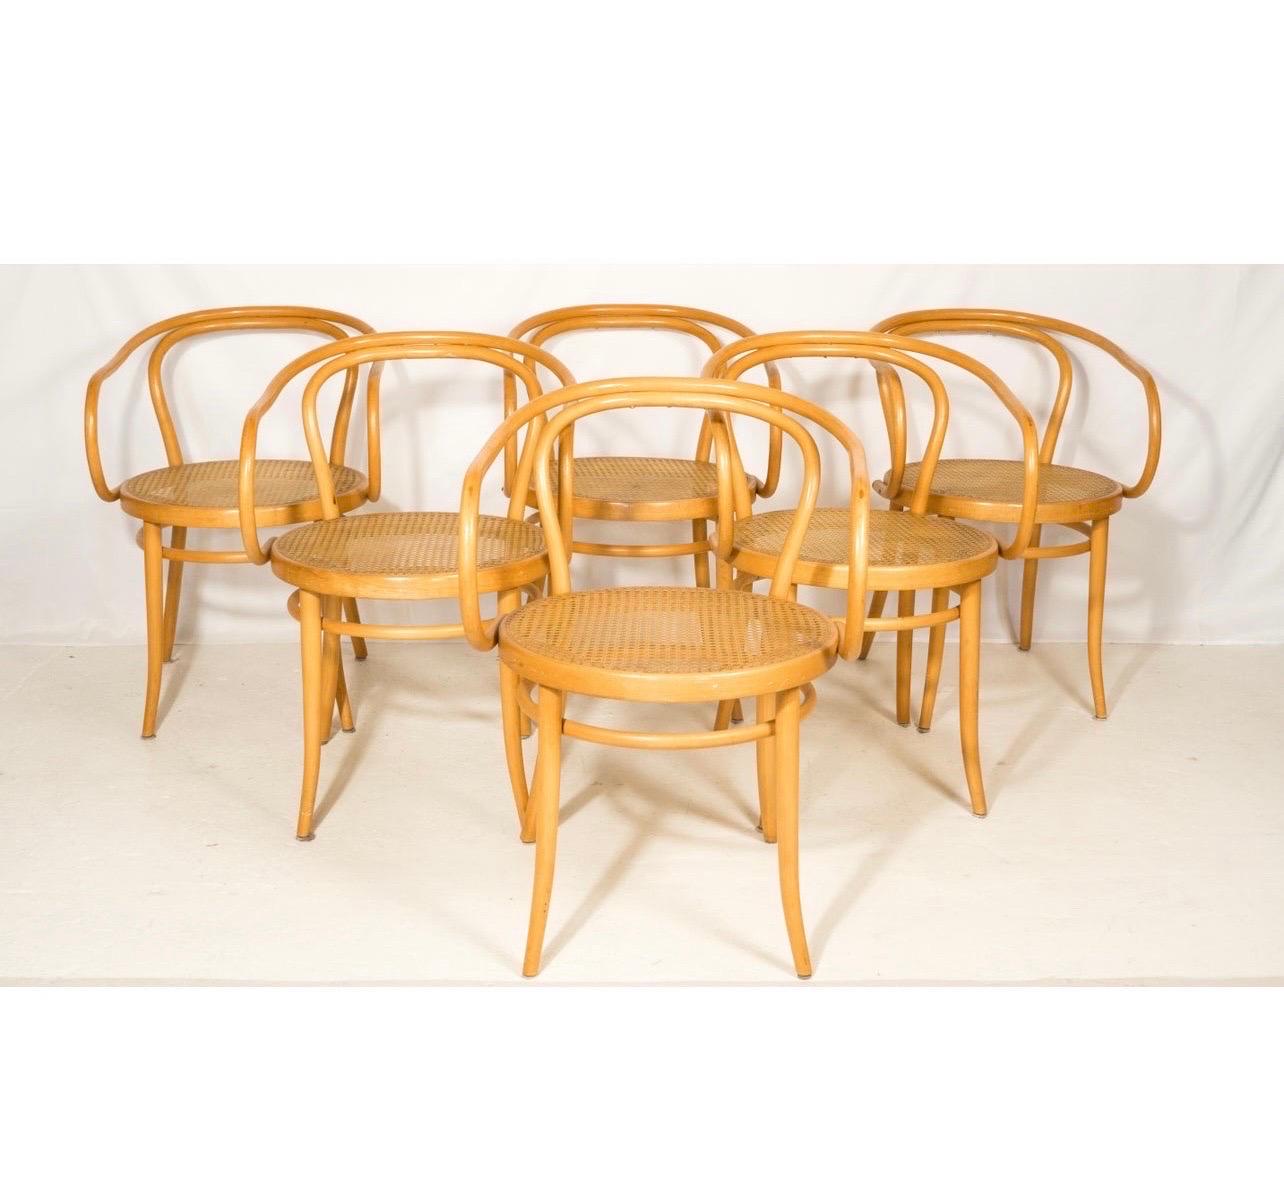 Mid-century Le Corbusier 'B9' dining chairs for Stendig, circa 1960s. Set of 6 bentwood and cane dining chairs. Lovely beech bentwood frame with translucent cane seat. Beautiful curvature and angles seen throughout the composition. A timeless